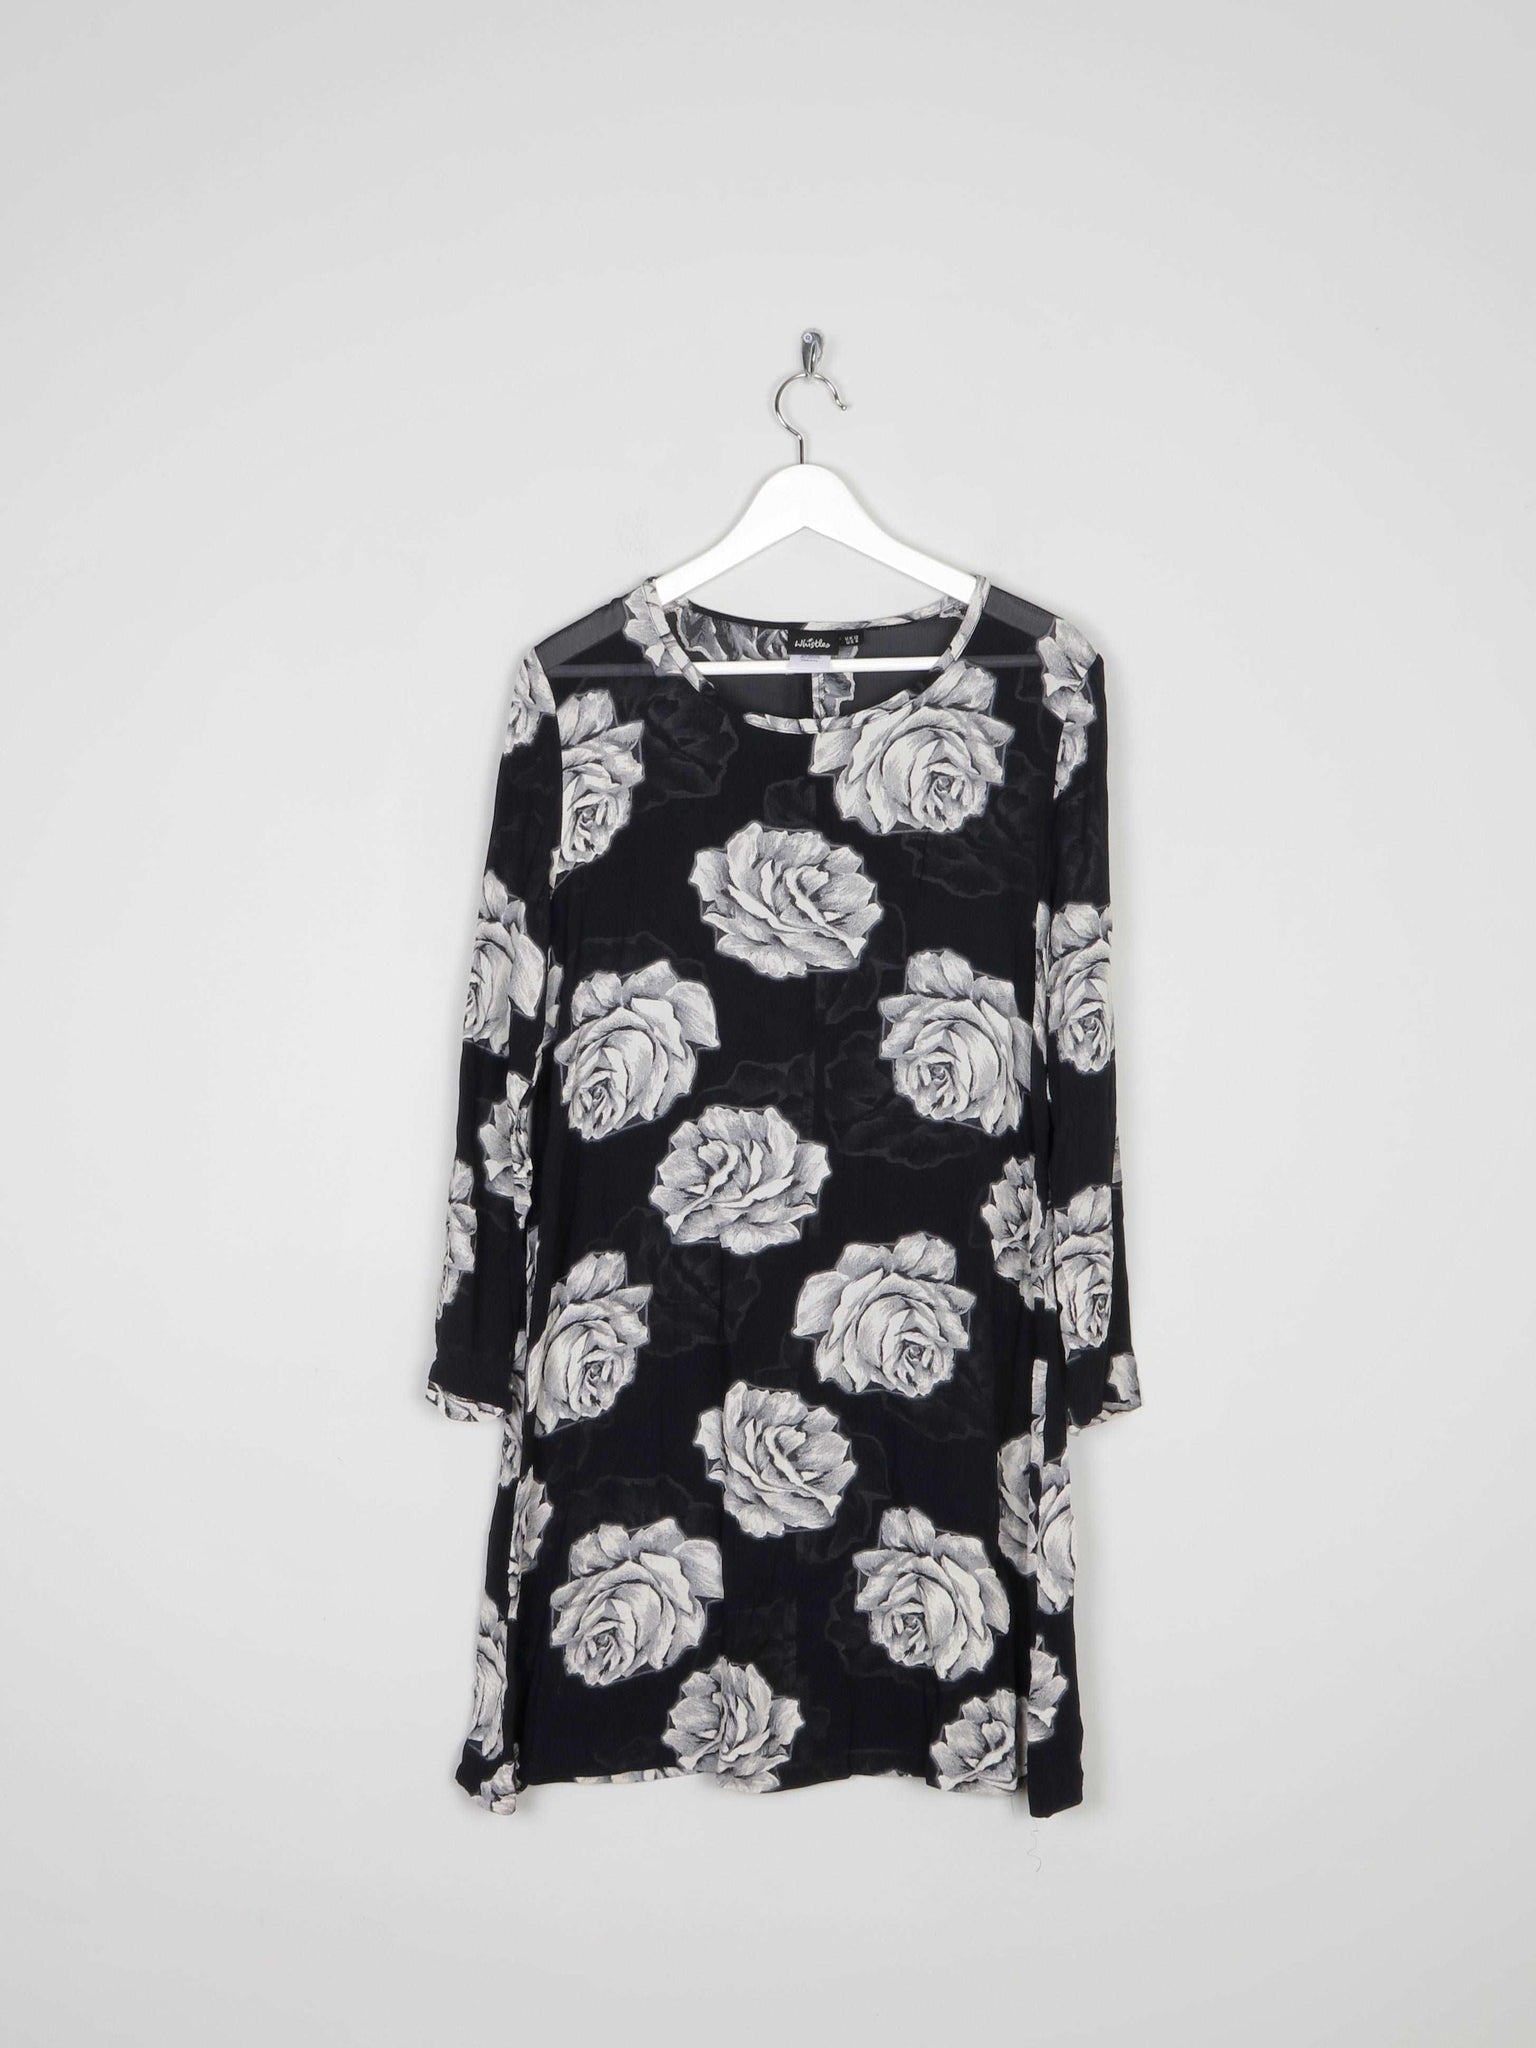 Black Vintage Whistles Dress With Flowers M - The Harlequin